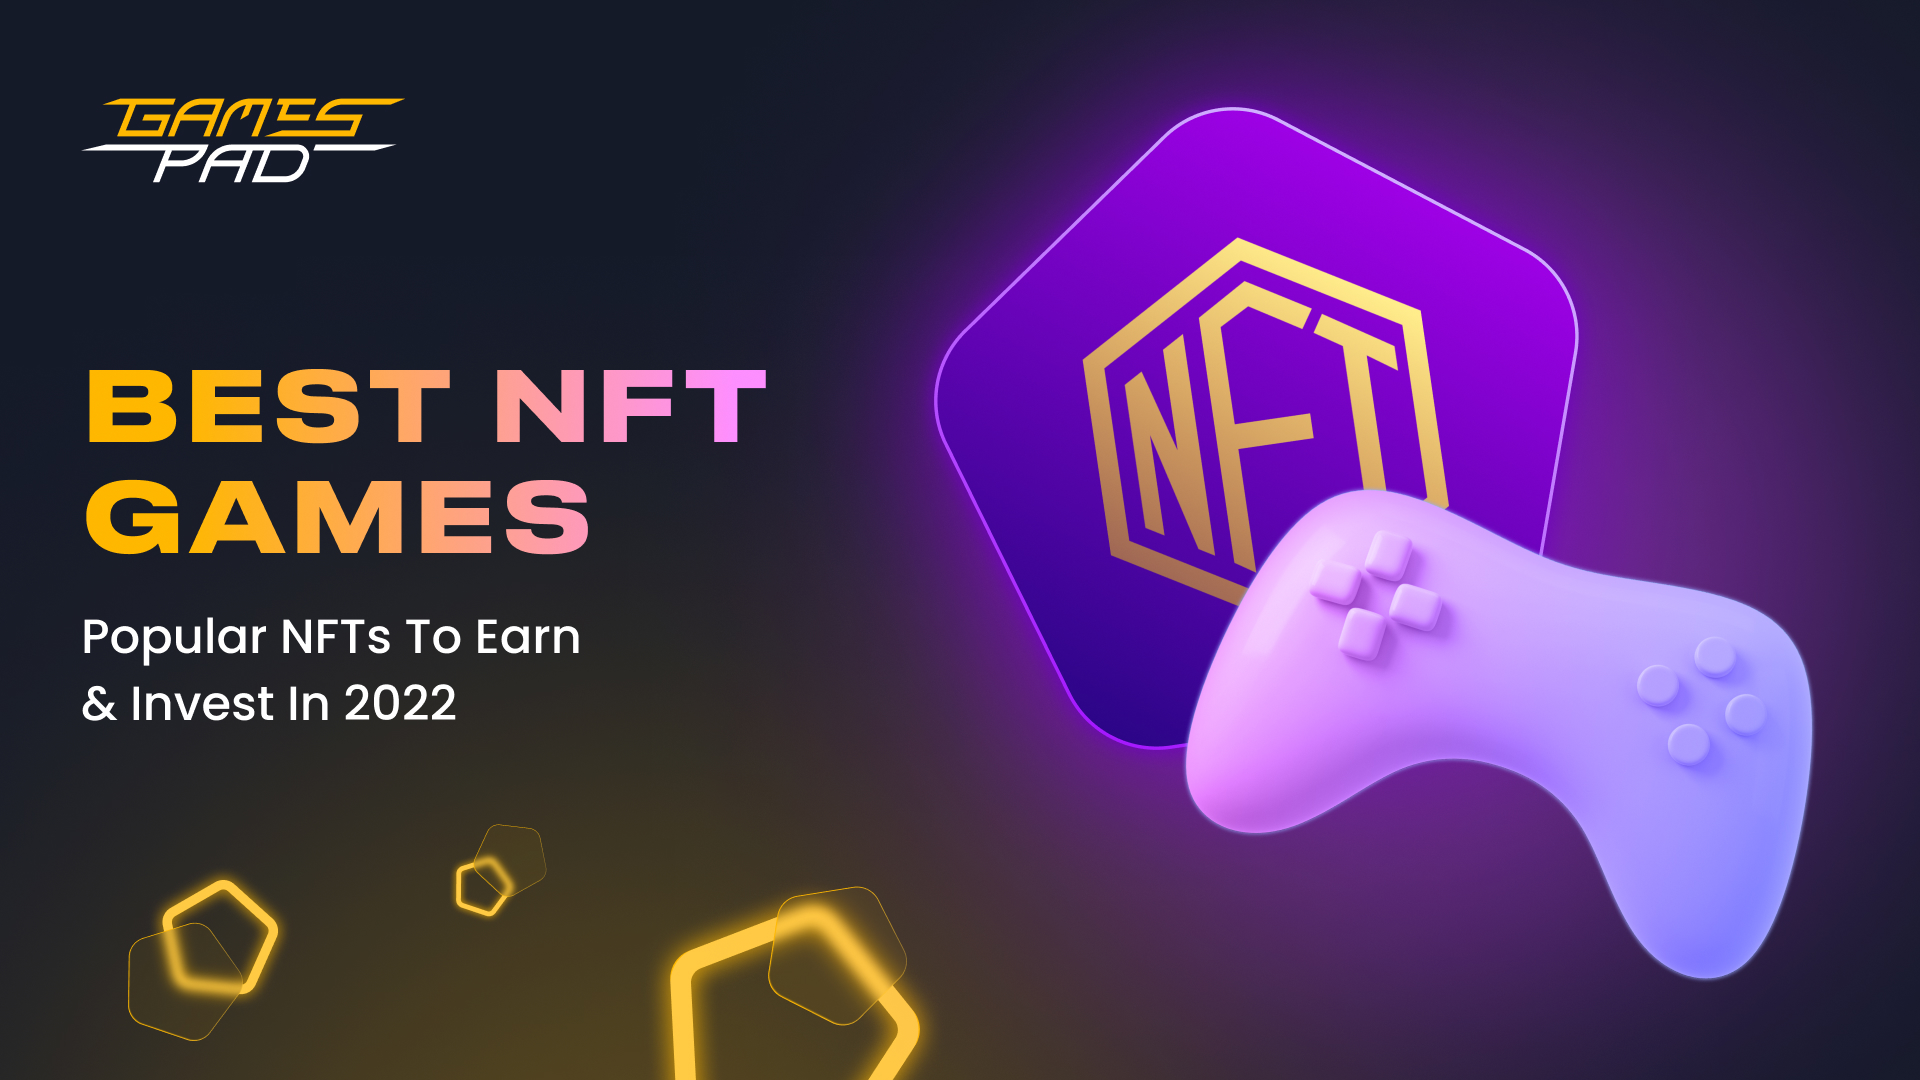 Best NFT Games: Popular NFTs to Earn & Invest In 2022 